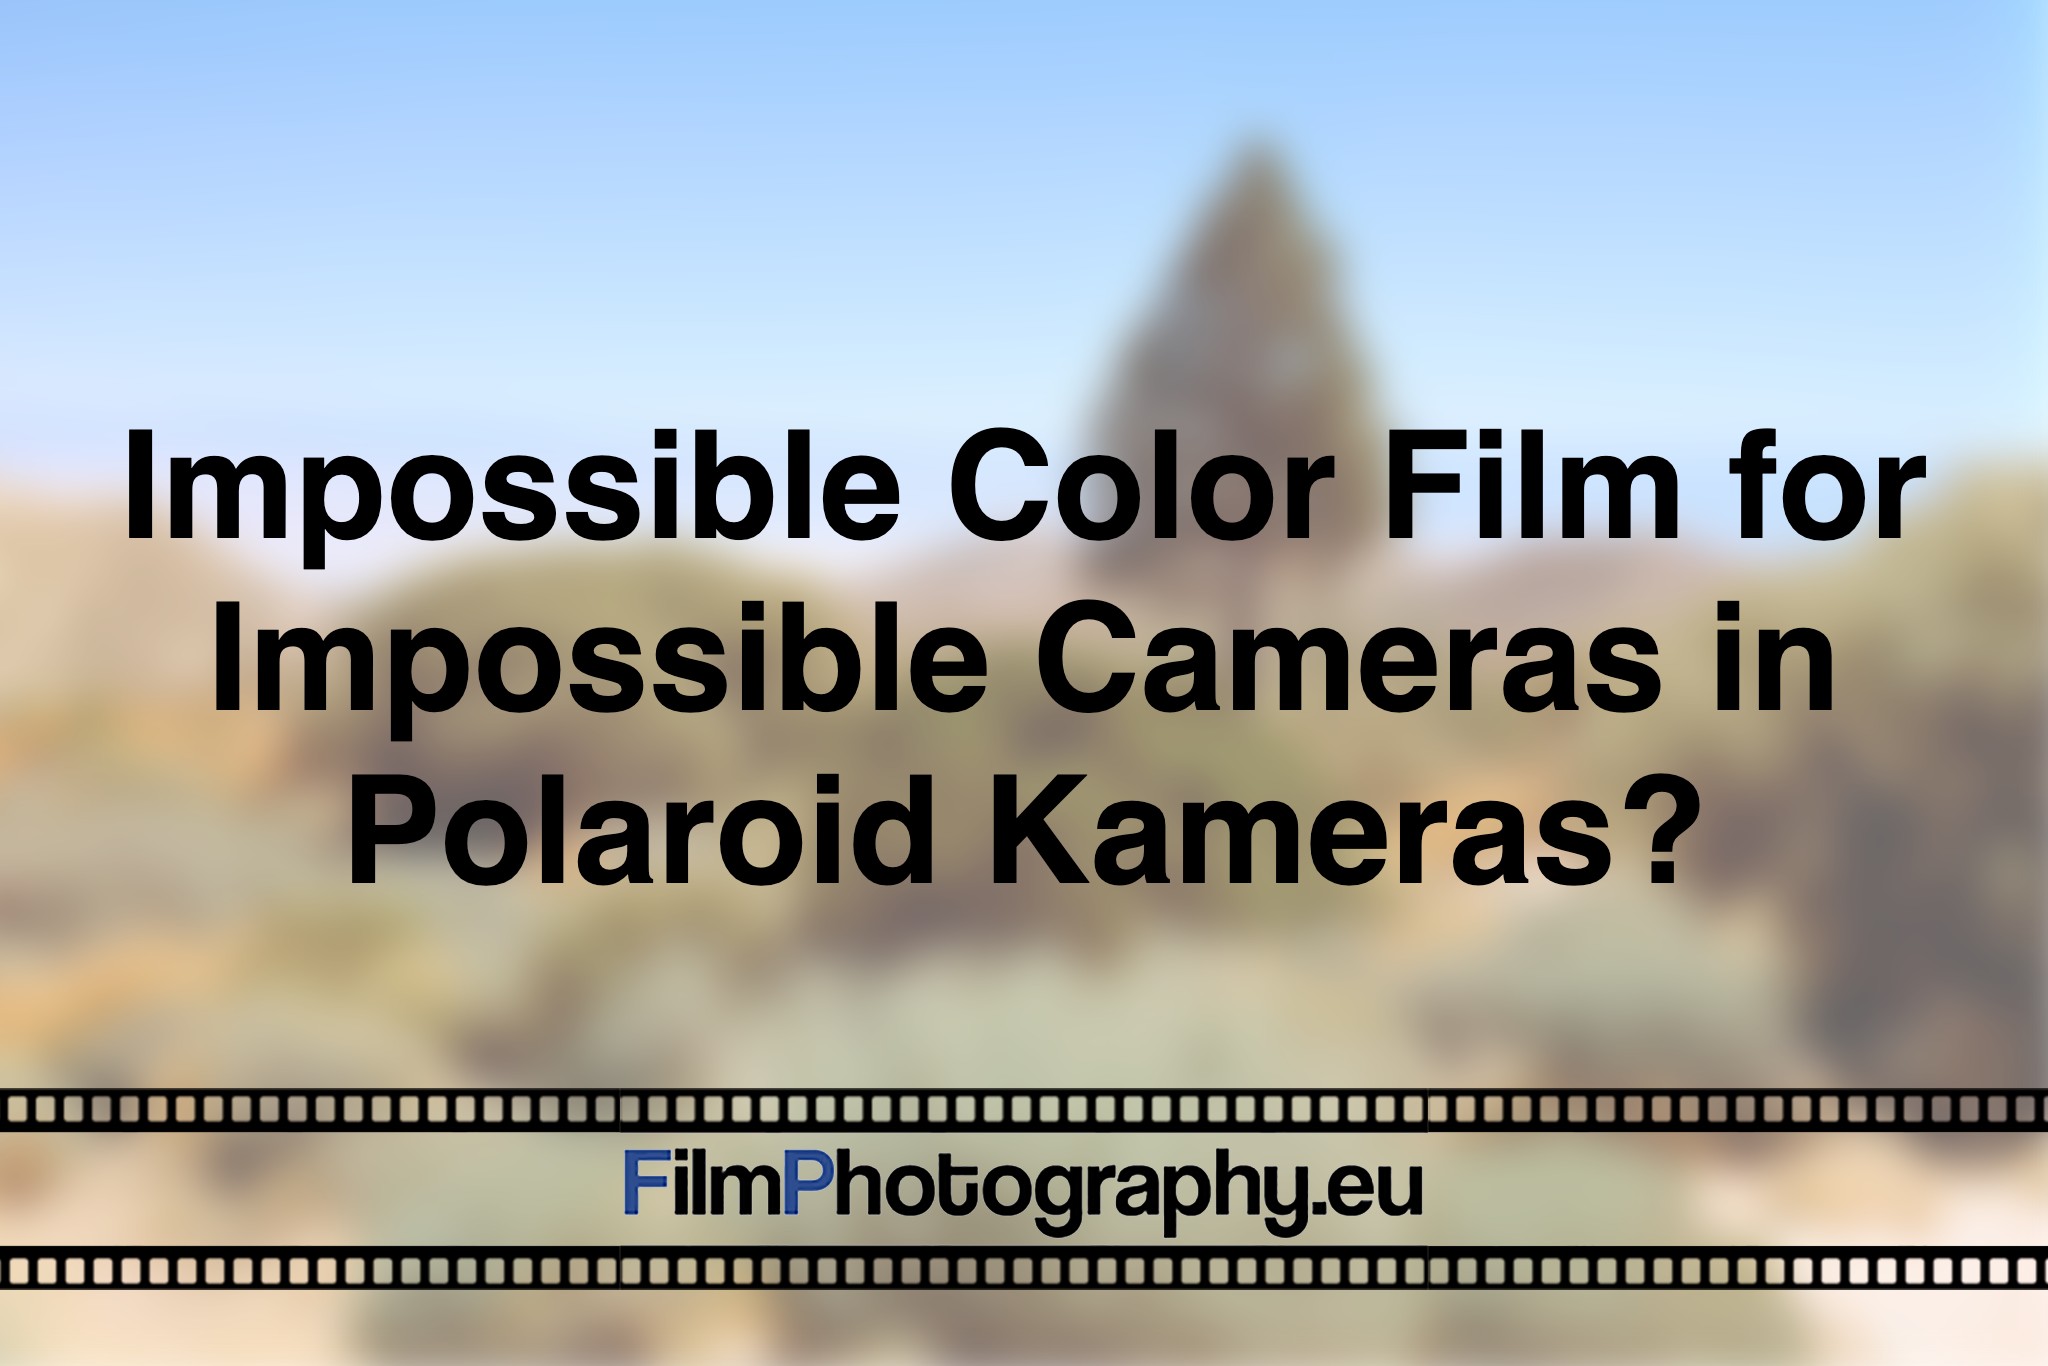 impossible-color-film-for-impossible-cameras-in-polaroid-kameras-photo-bnv